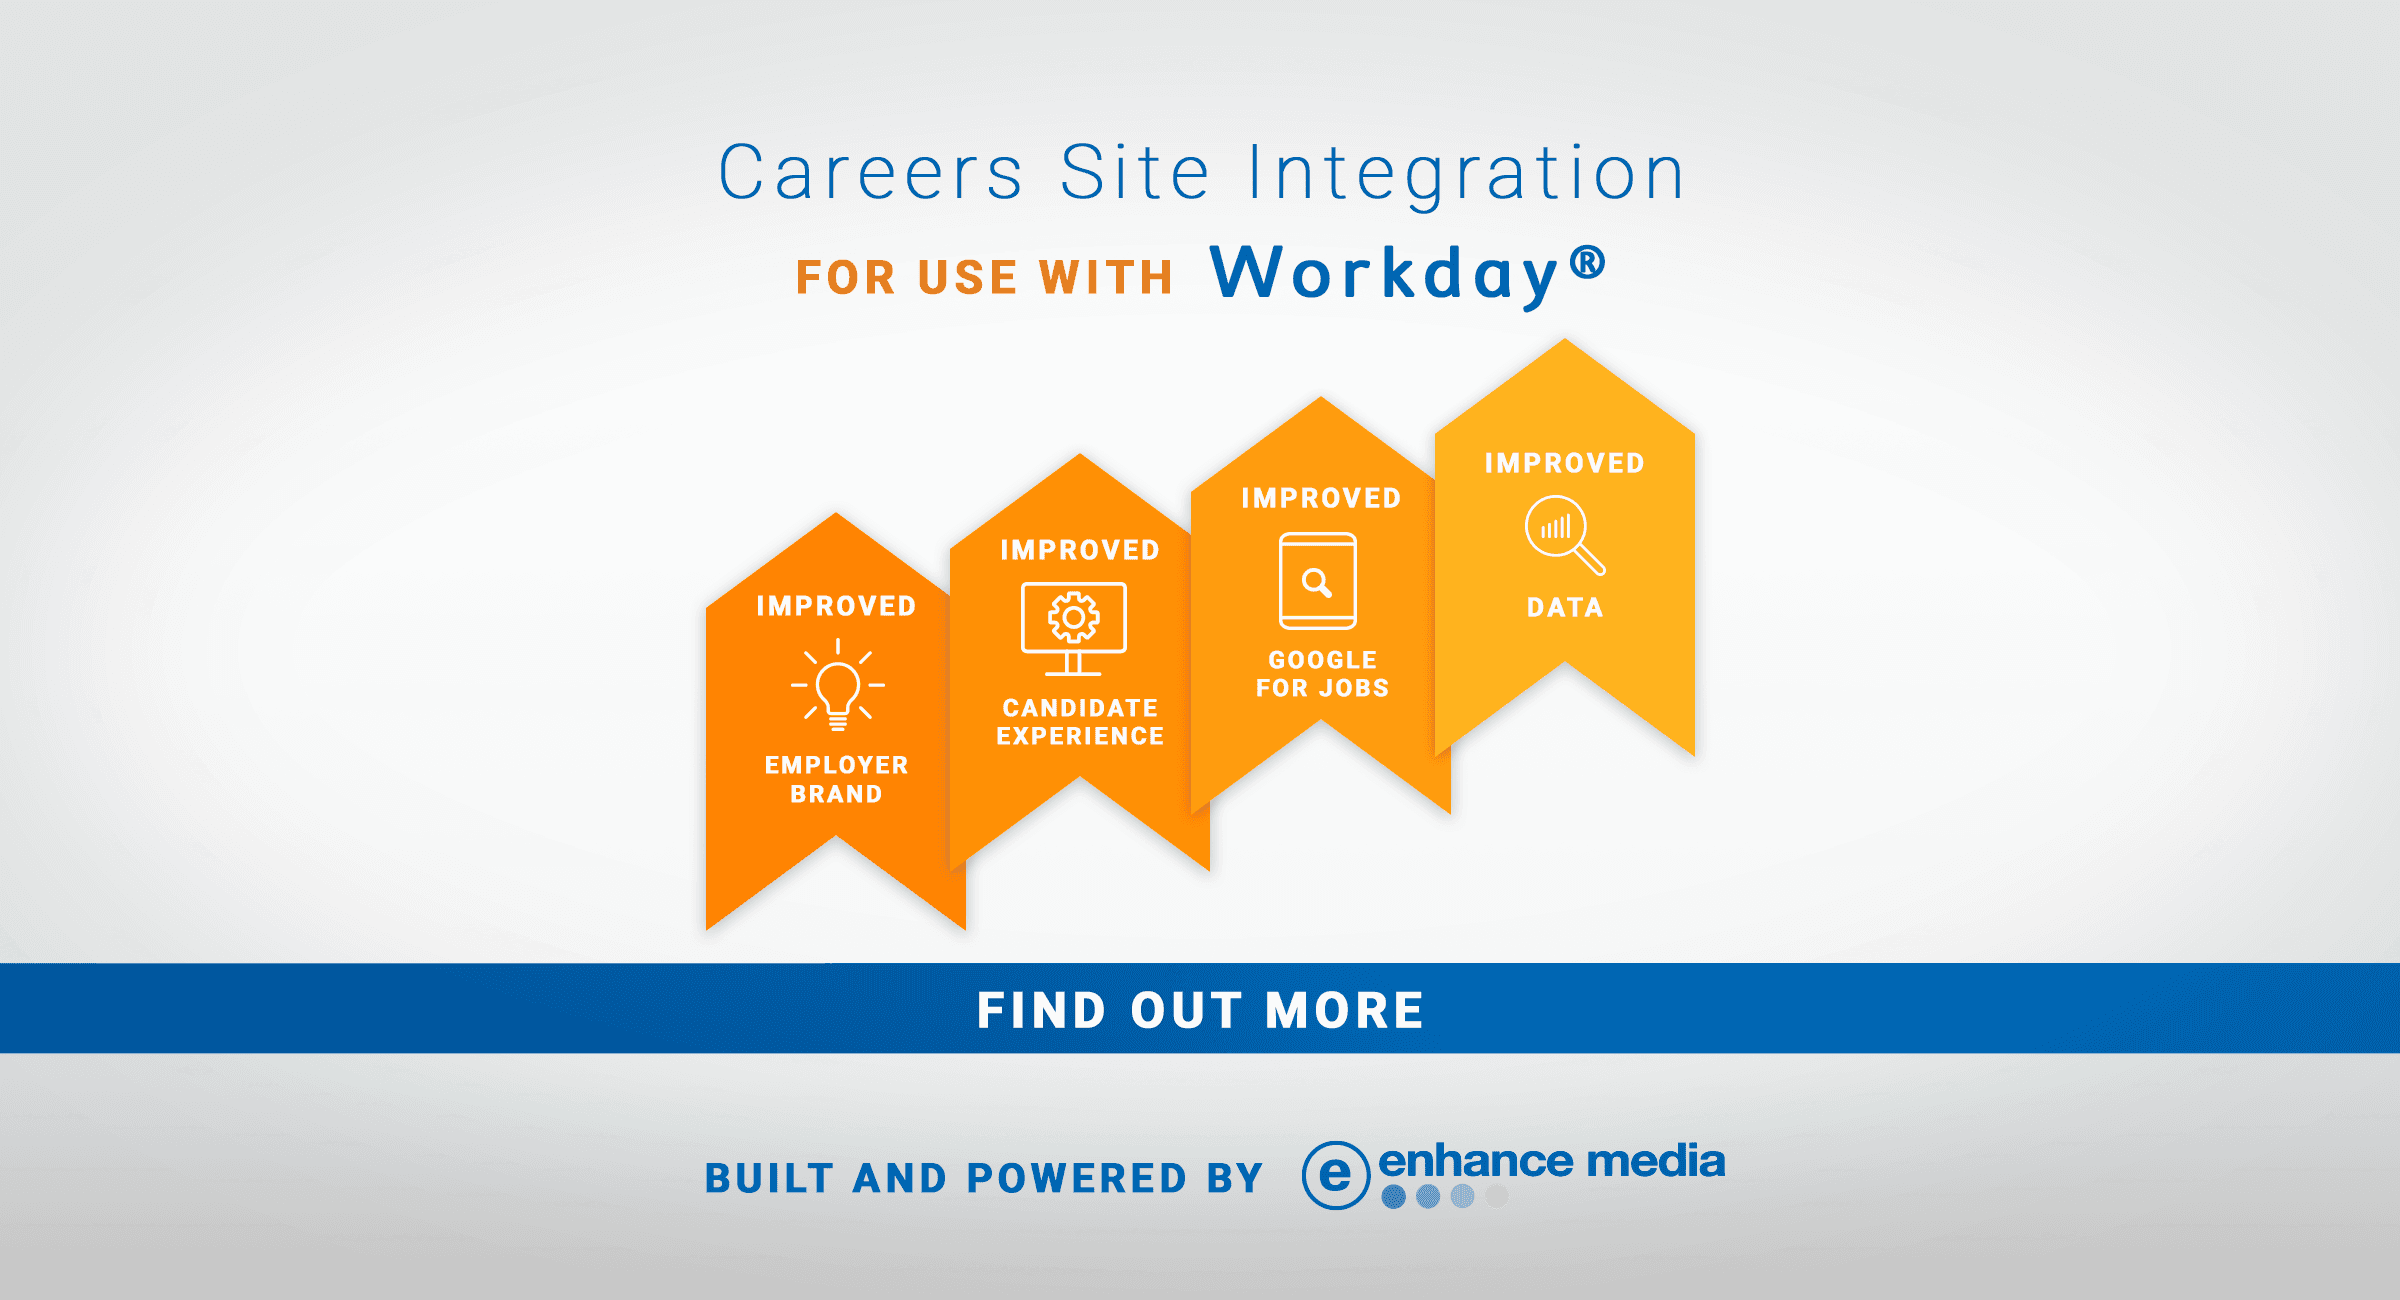 Product Workday ATS Integration with Careers Websites | Enhance Media image